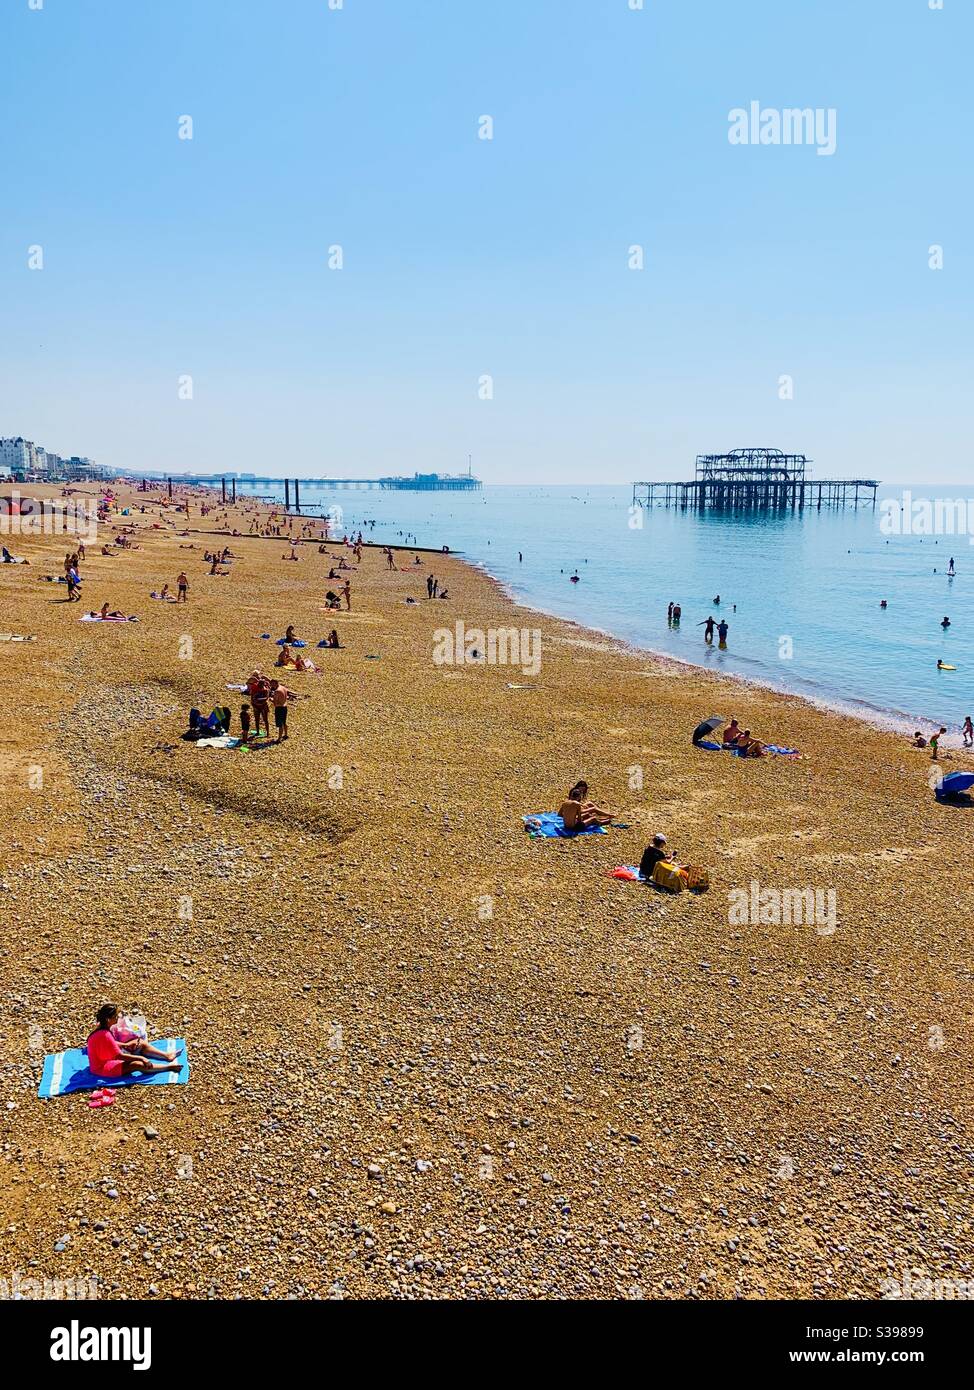 Brighton, UK - 11 August 2020: A view of both west and palace piers and the golden beach. Summer heatwave 2020. Stock Photo